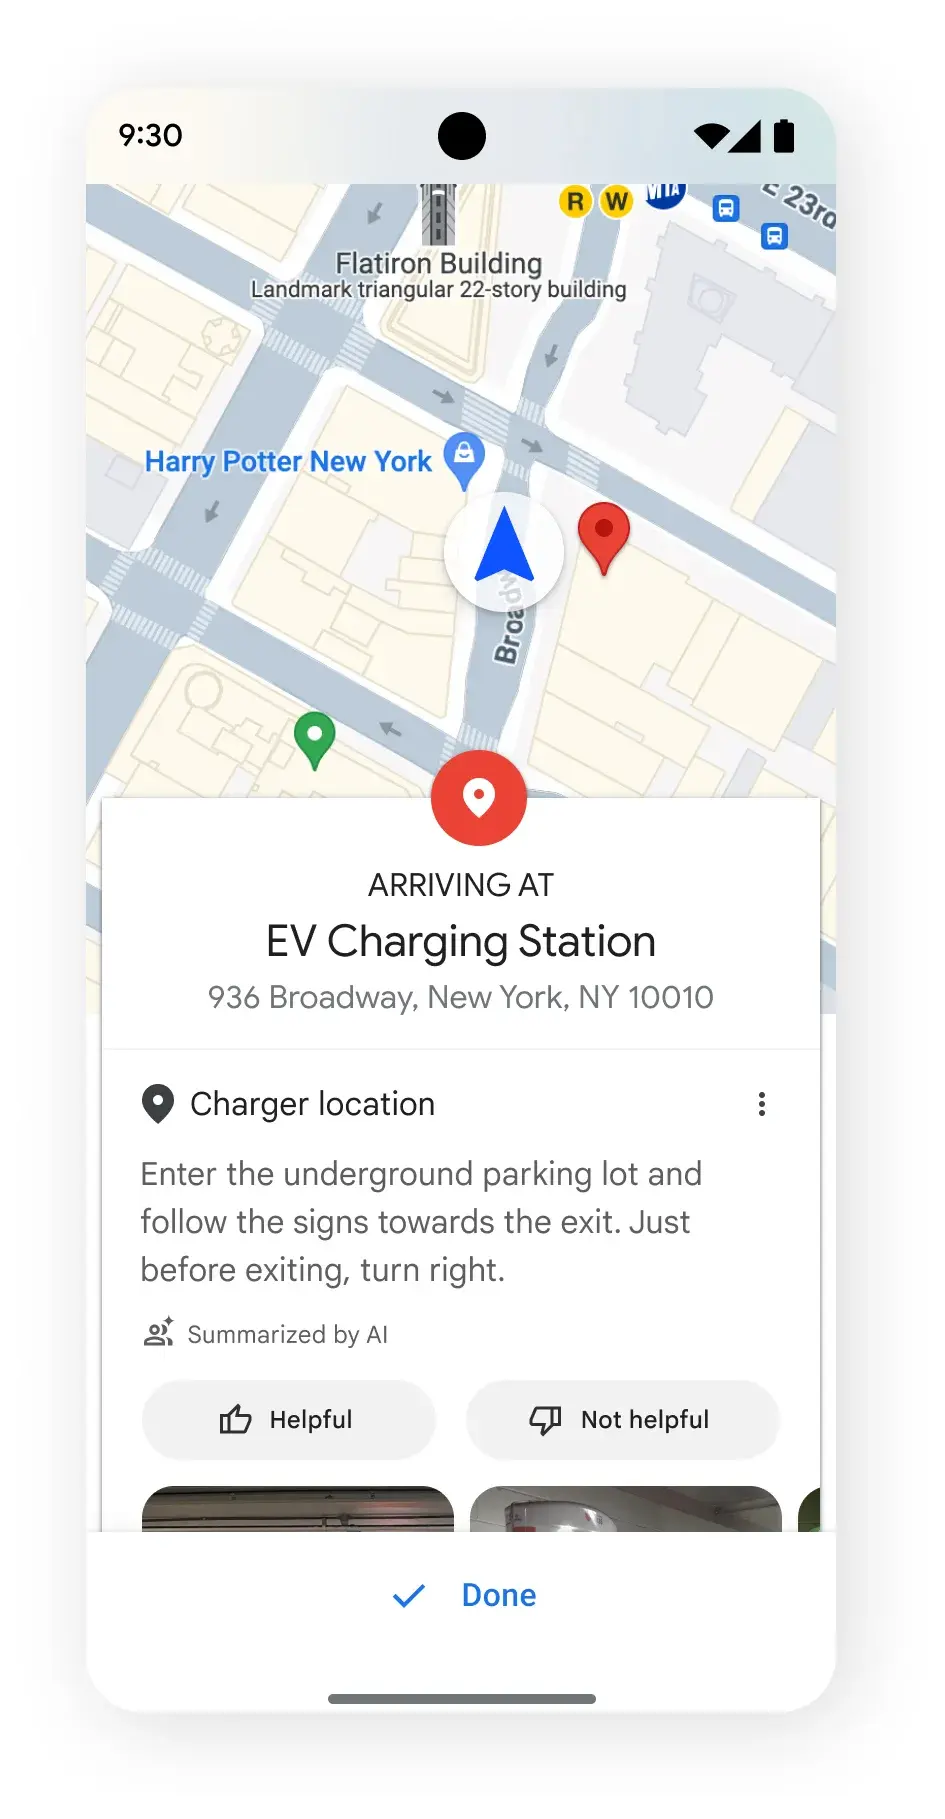 (Image Source - Google) AI-generated directions to EV charging stations - Google Maps will provide detailed directions to EV charging stations and more info for drivers